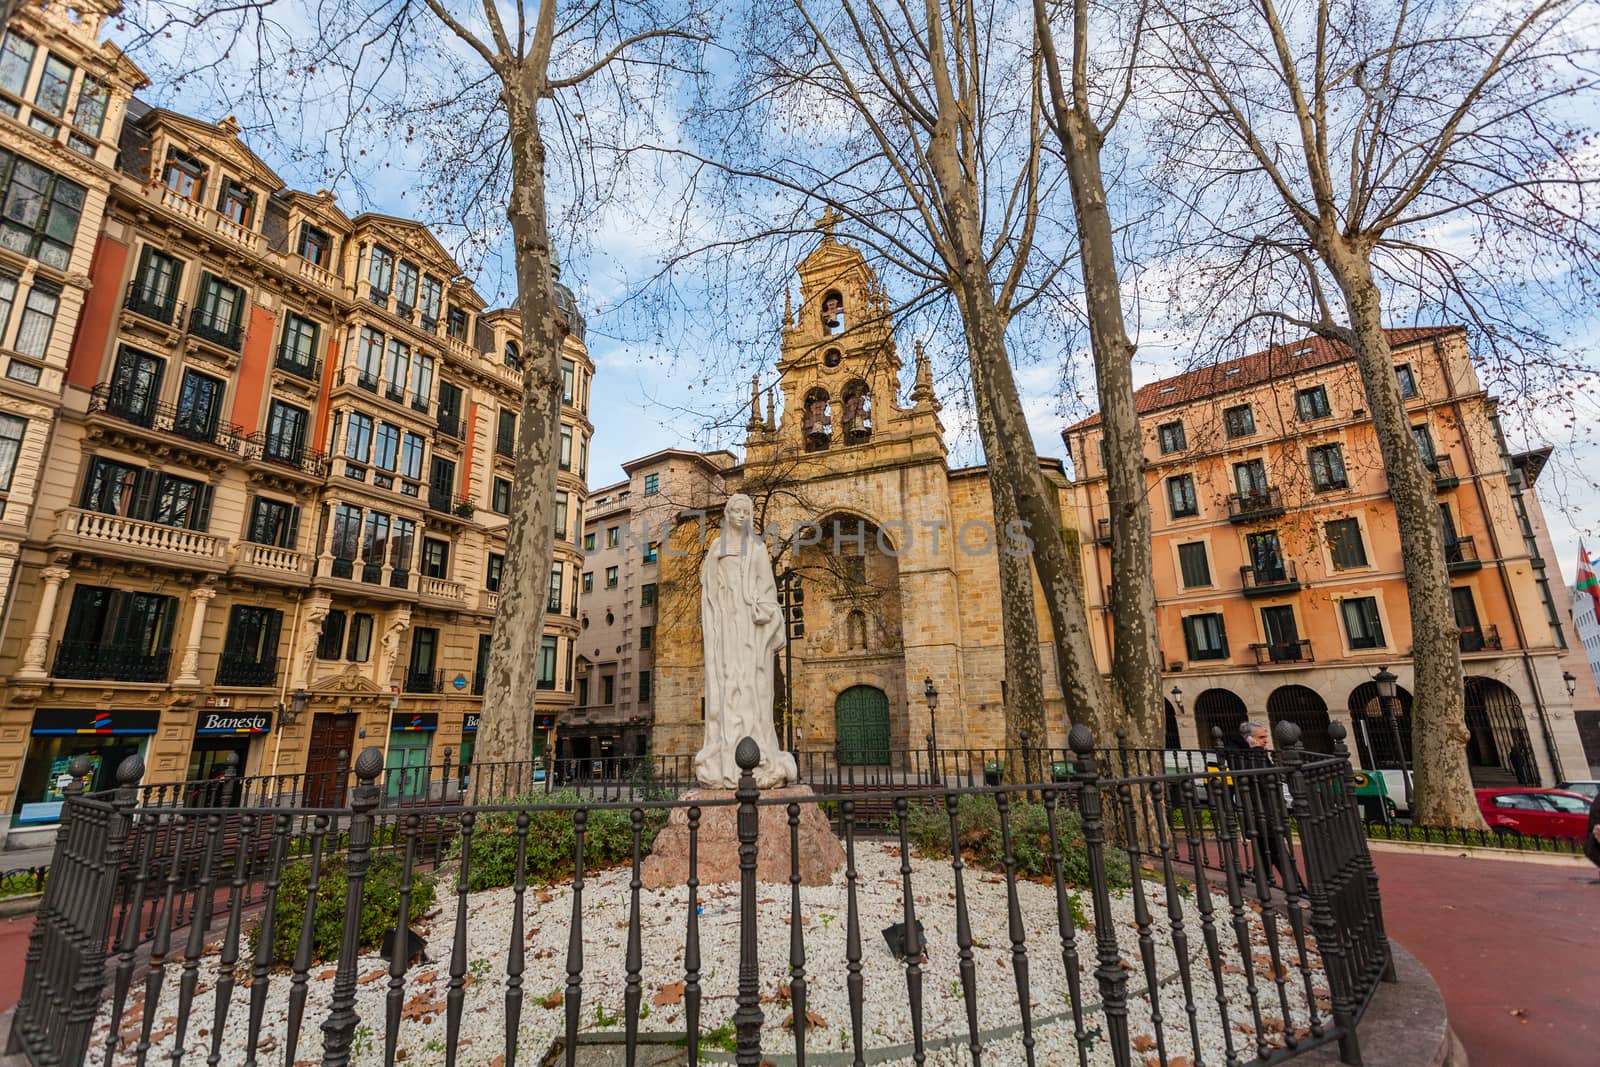 Full view of San Vicente square in the city of Bilbao with the church at the bottom